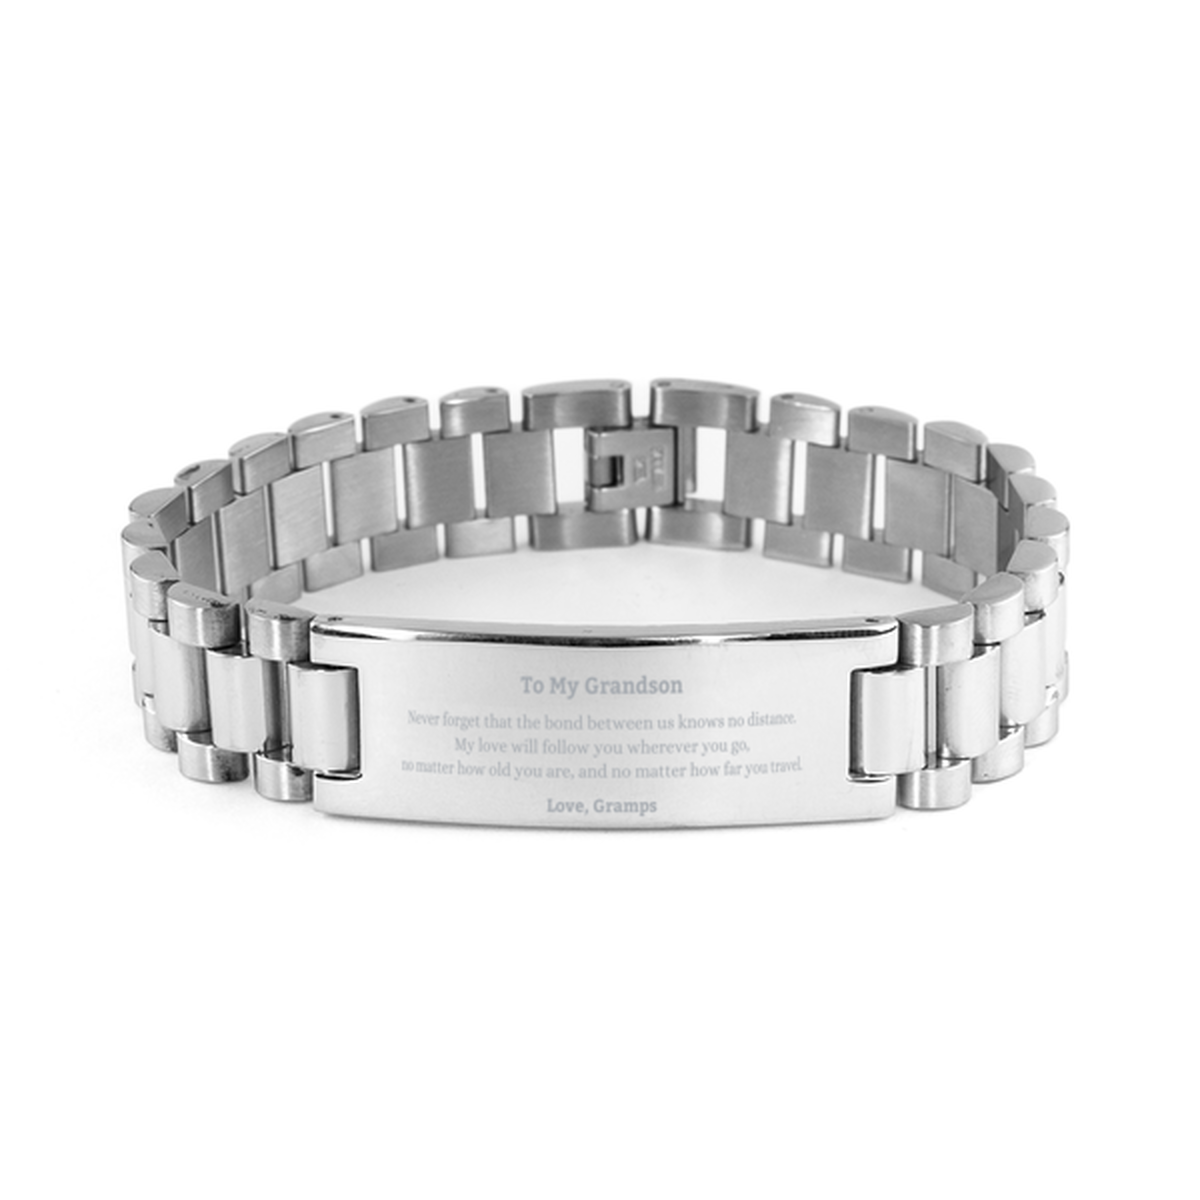 Grandson Birthday Gifts from Gramps, Adjustable Ladder Stainless Steel Bracelet for Grandson Christmas Graduation Unique Gifts Grandson Never forget that the bond between us knows no distance. Love, Gramps